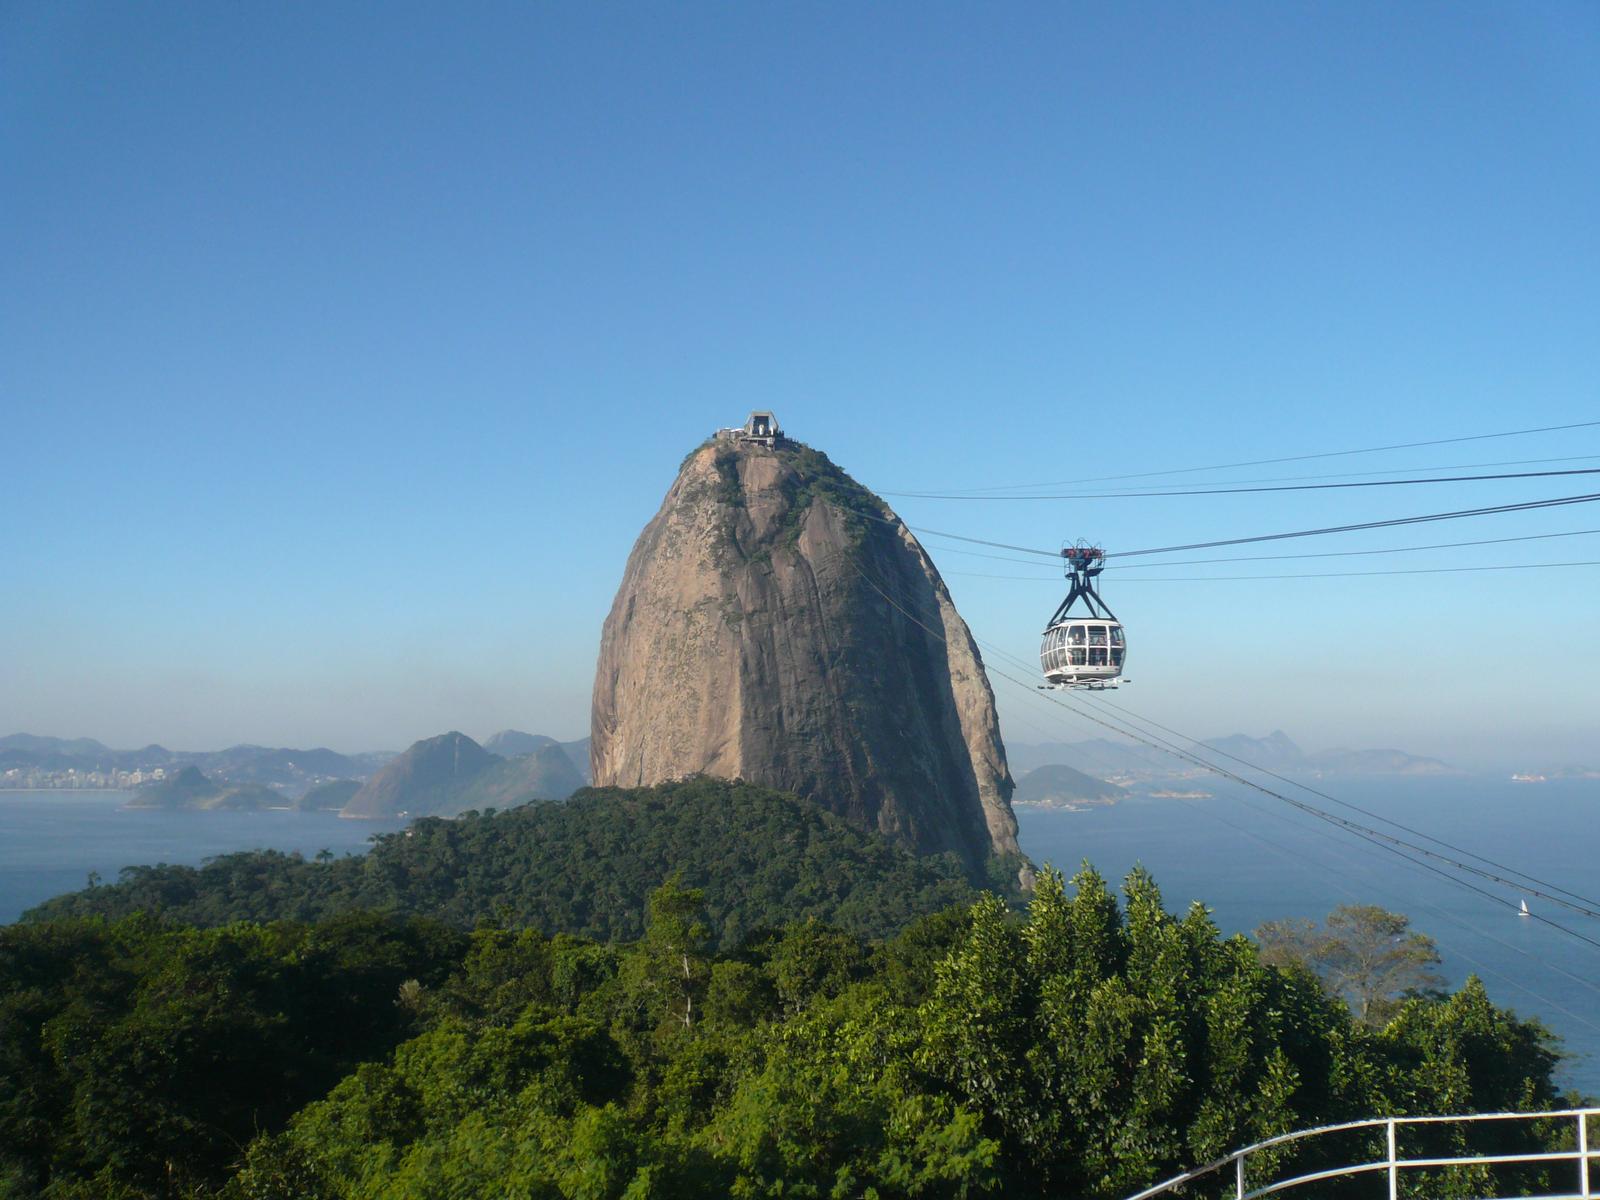 How Well-Rounded Is Your Knowledge? Take This General Knowledge Quiz to Find Out! Sugarloaf Mountain, Rio de Janeiro, Brazil